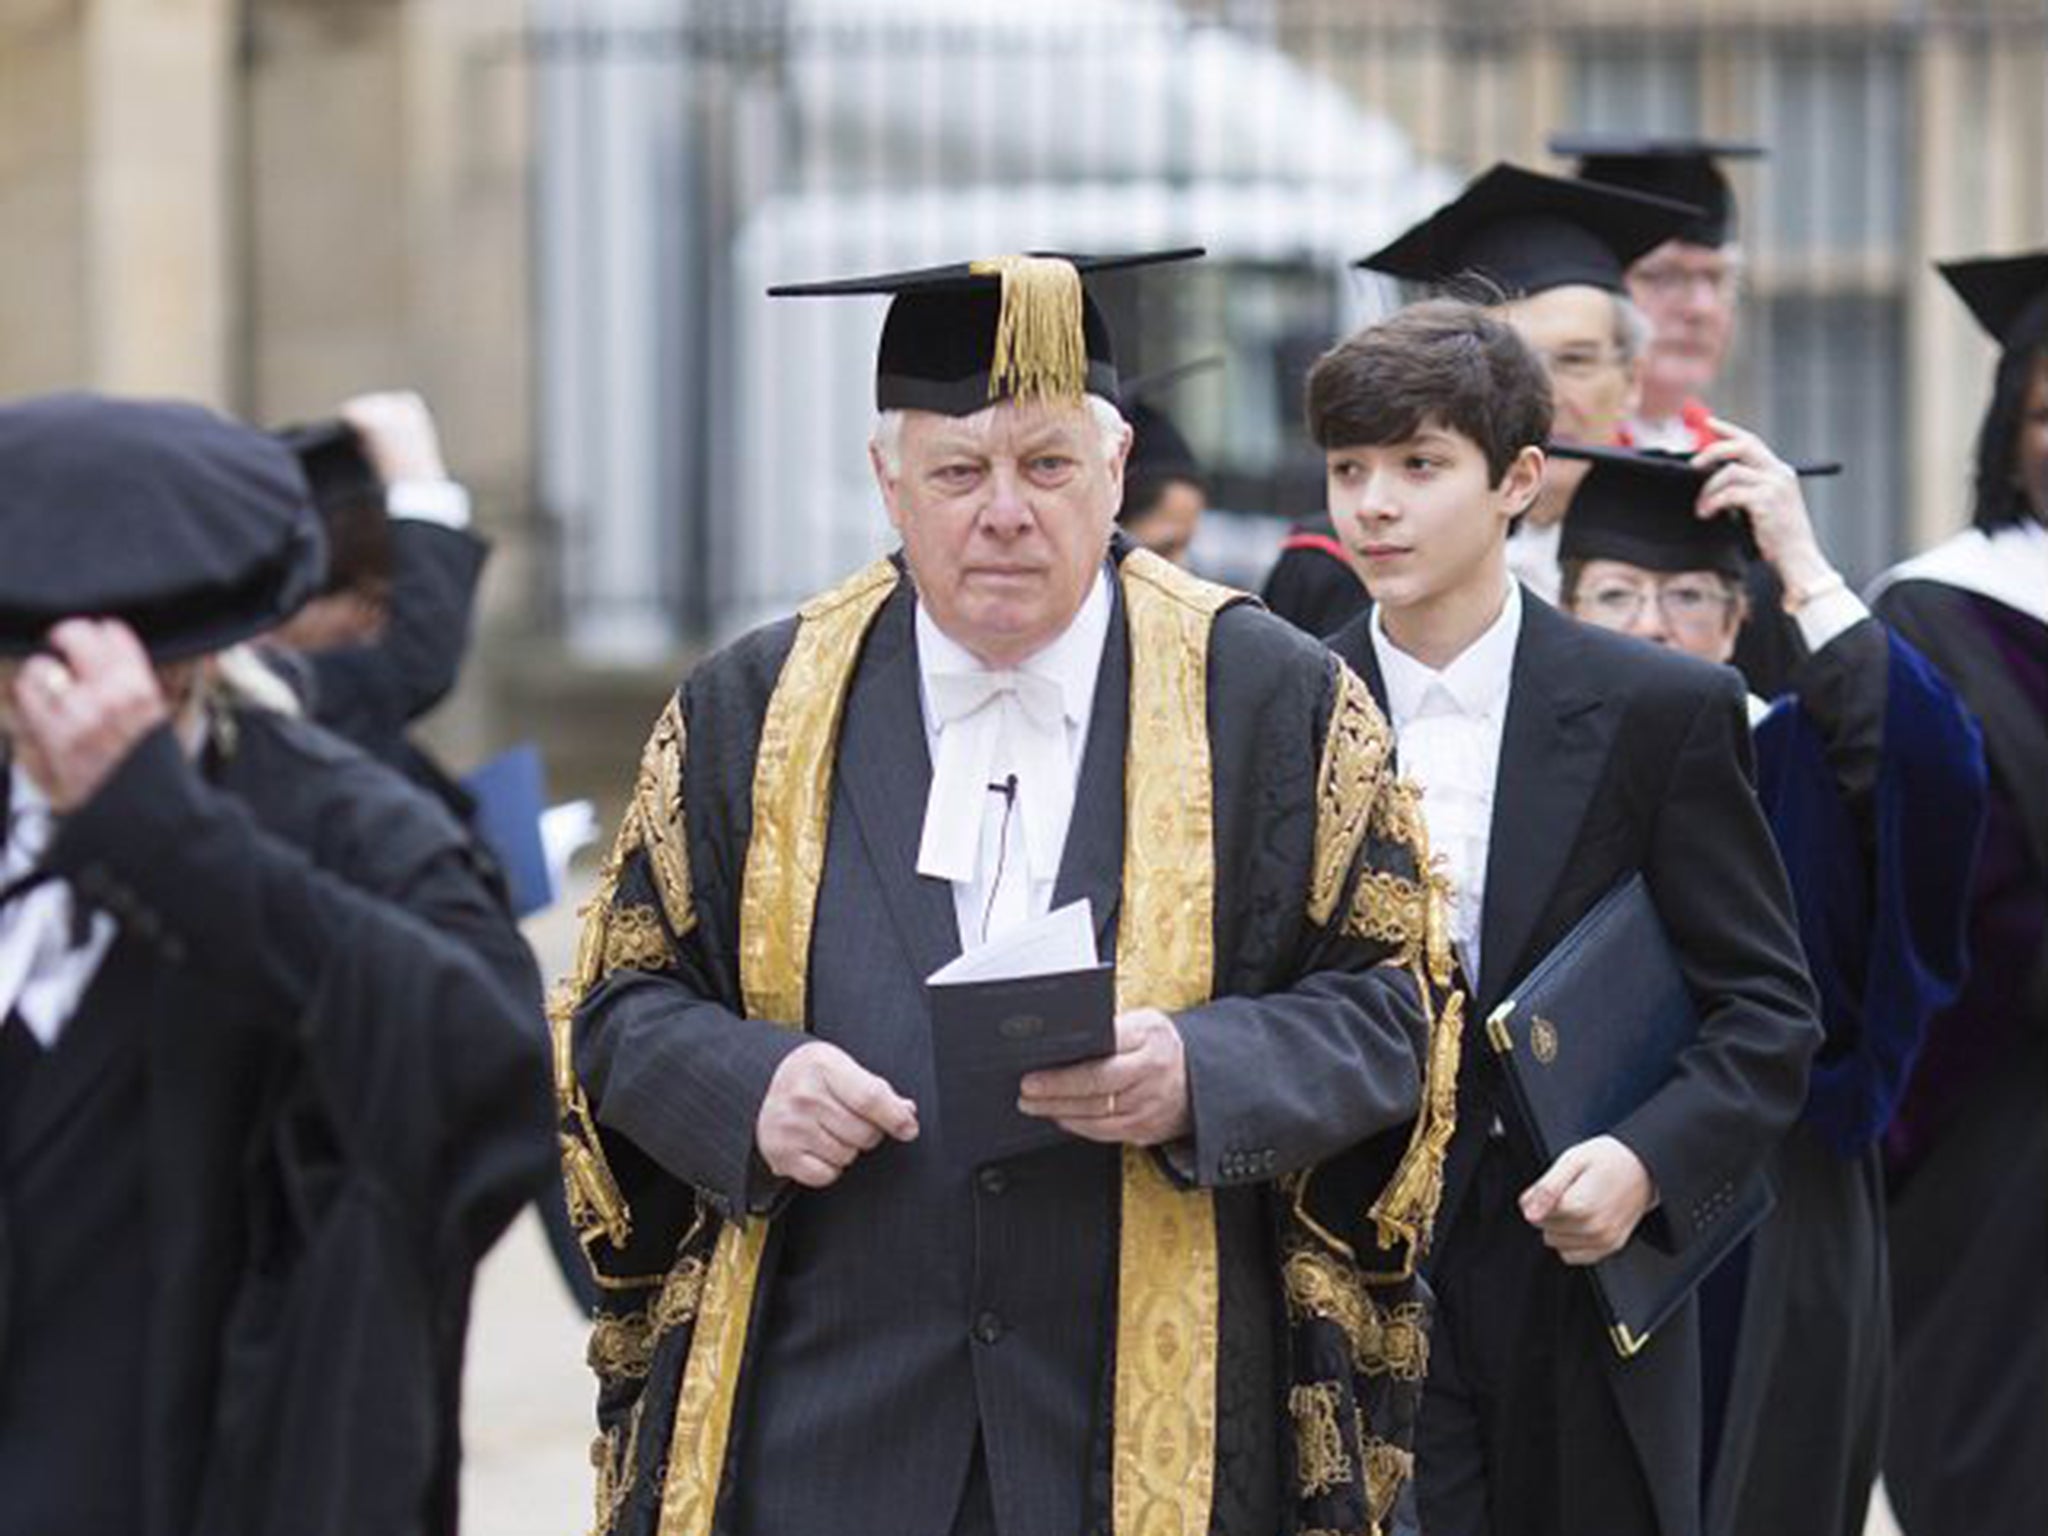 Lord Patten said the independence of universities was integral to producing academic success